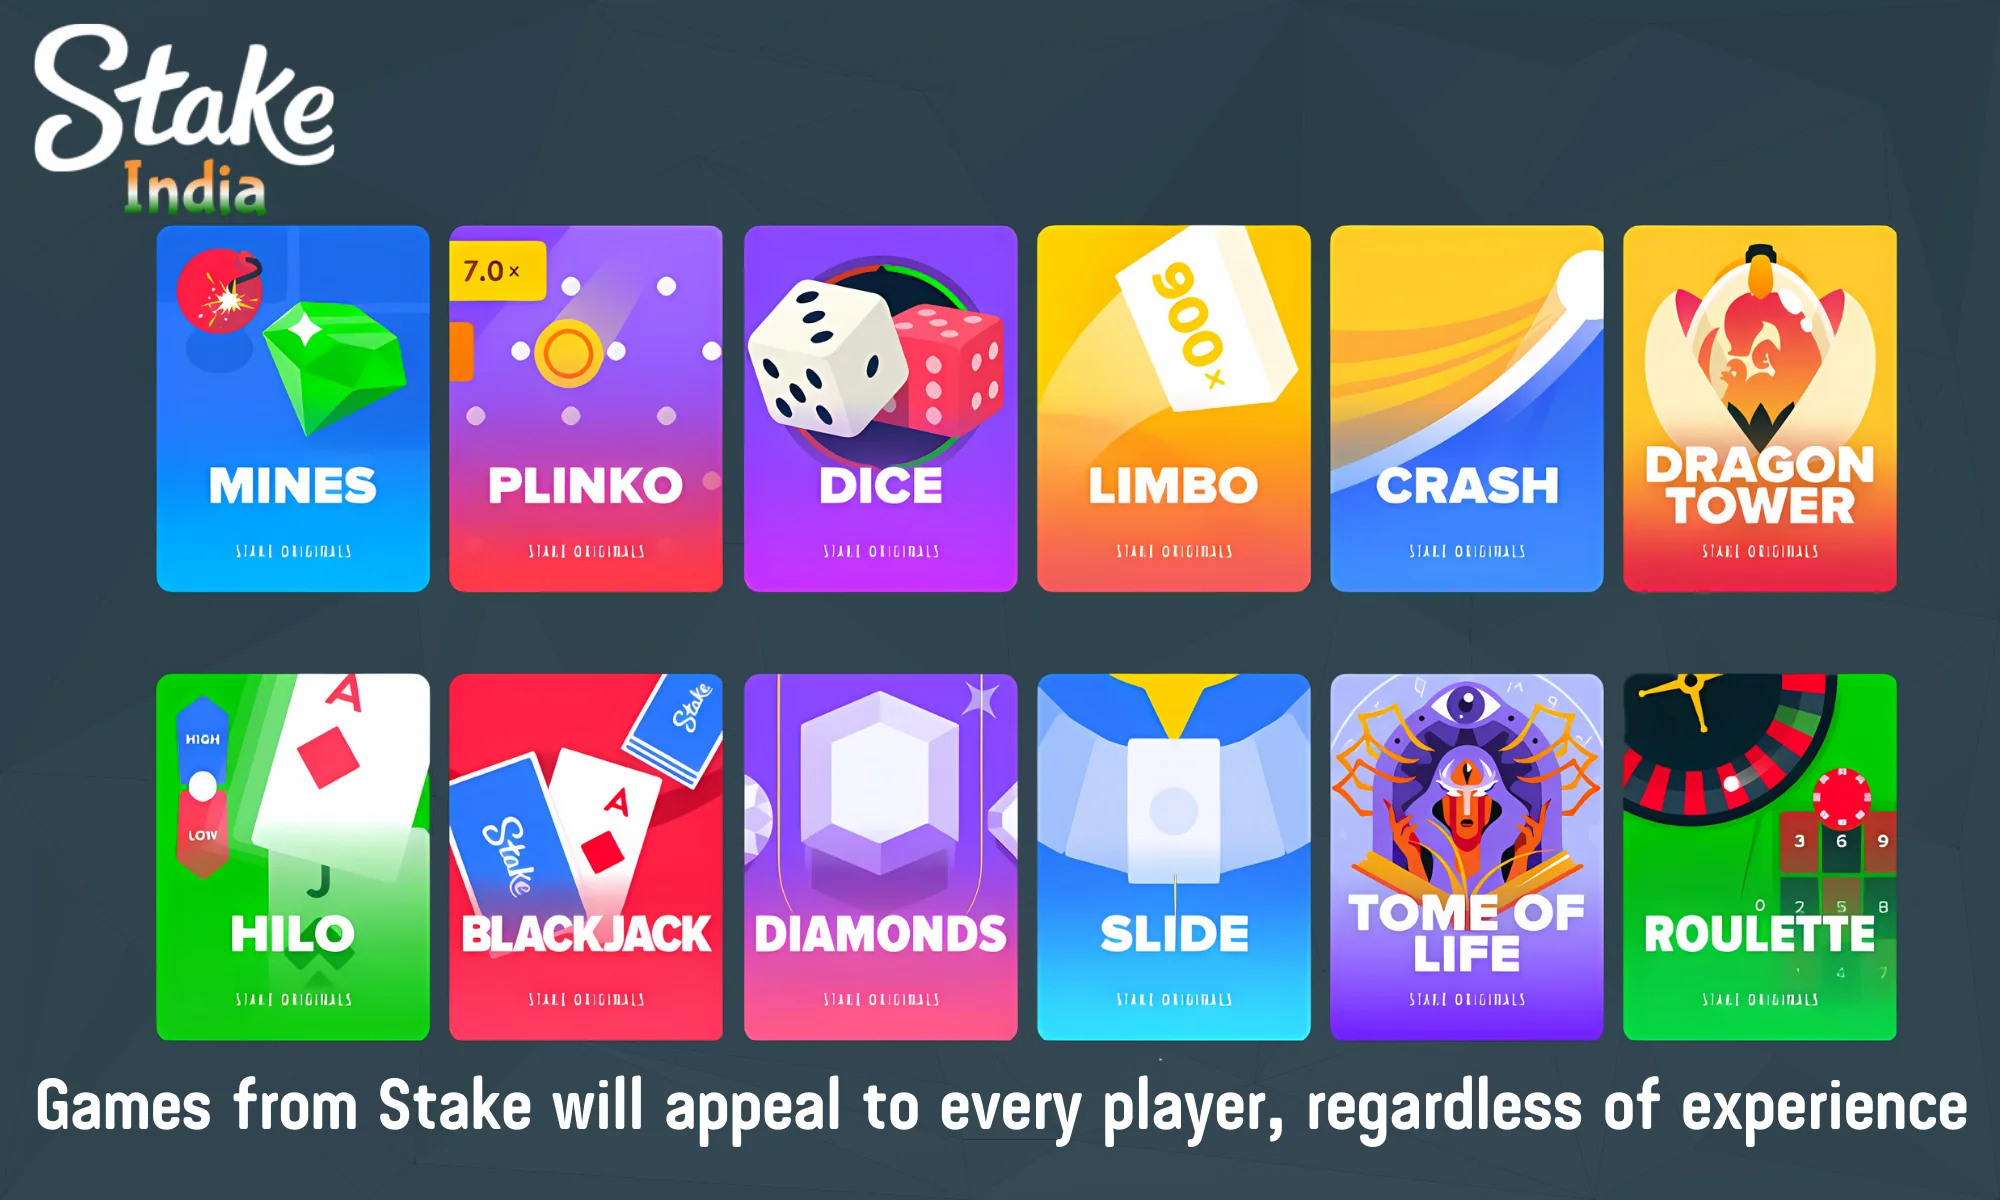 Stake has earned its reputation by offering high quality and a wide range of games